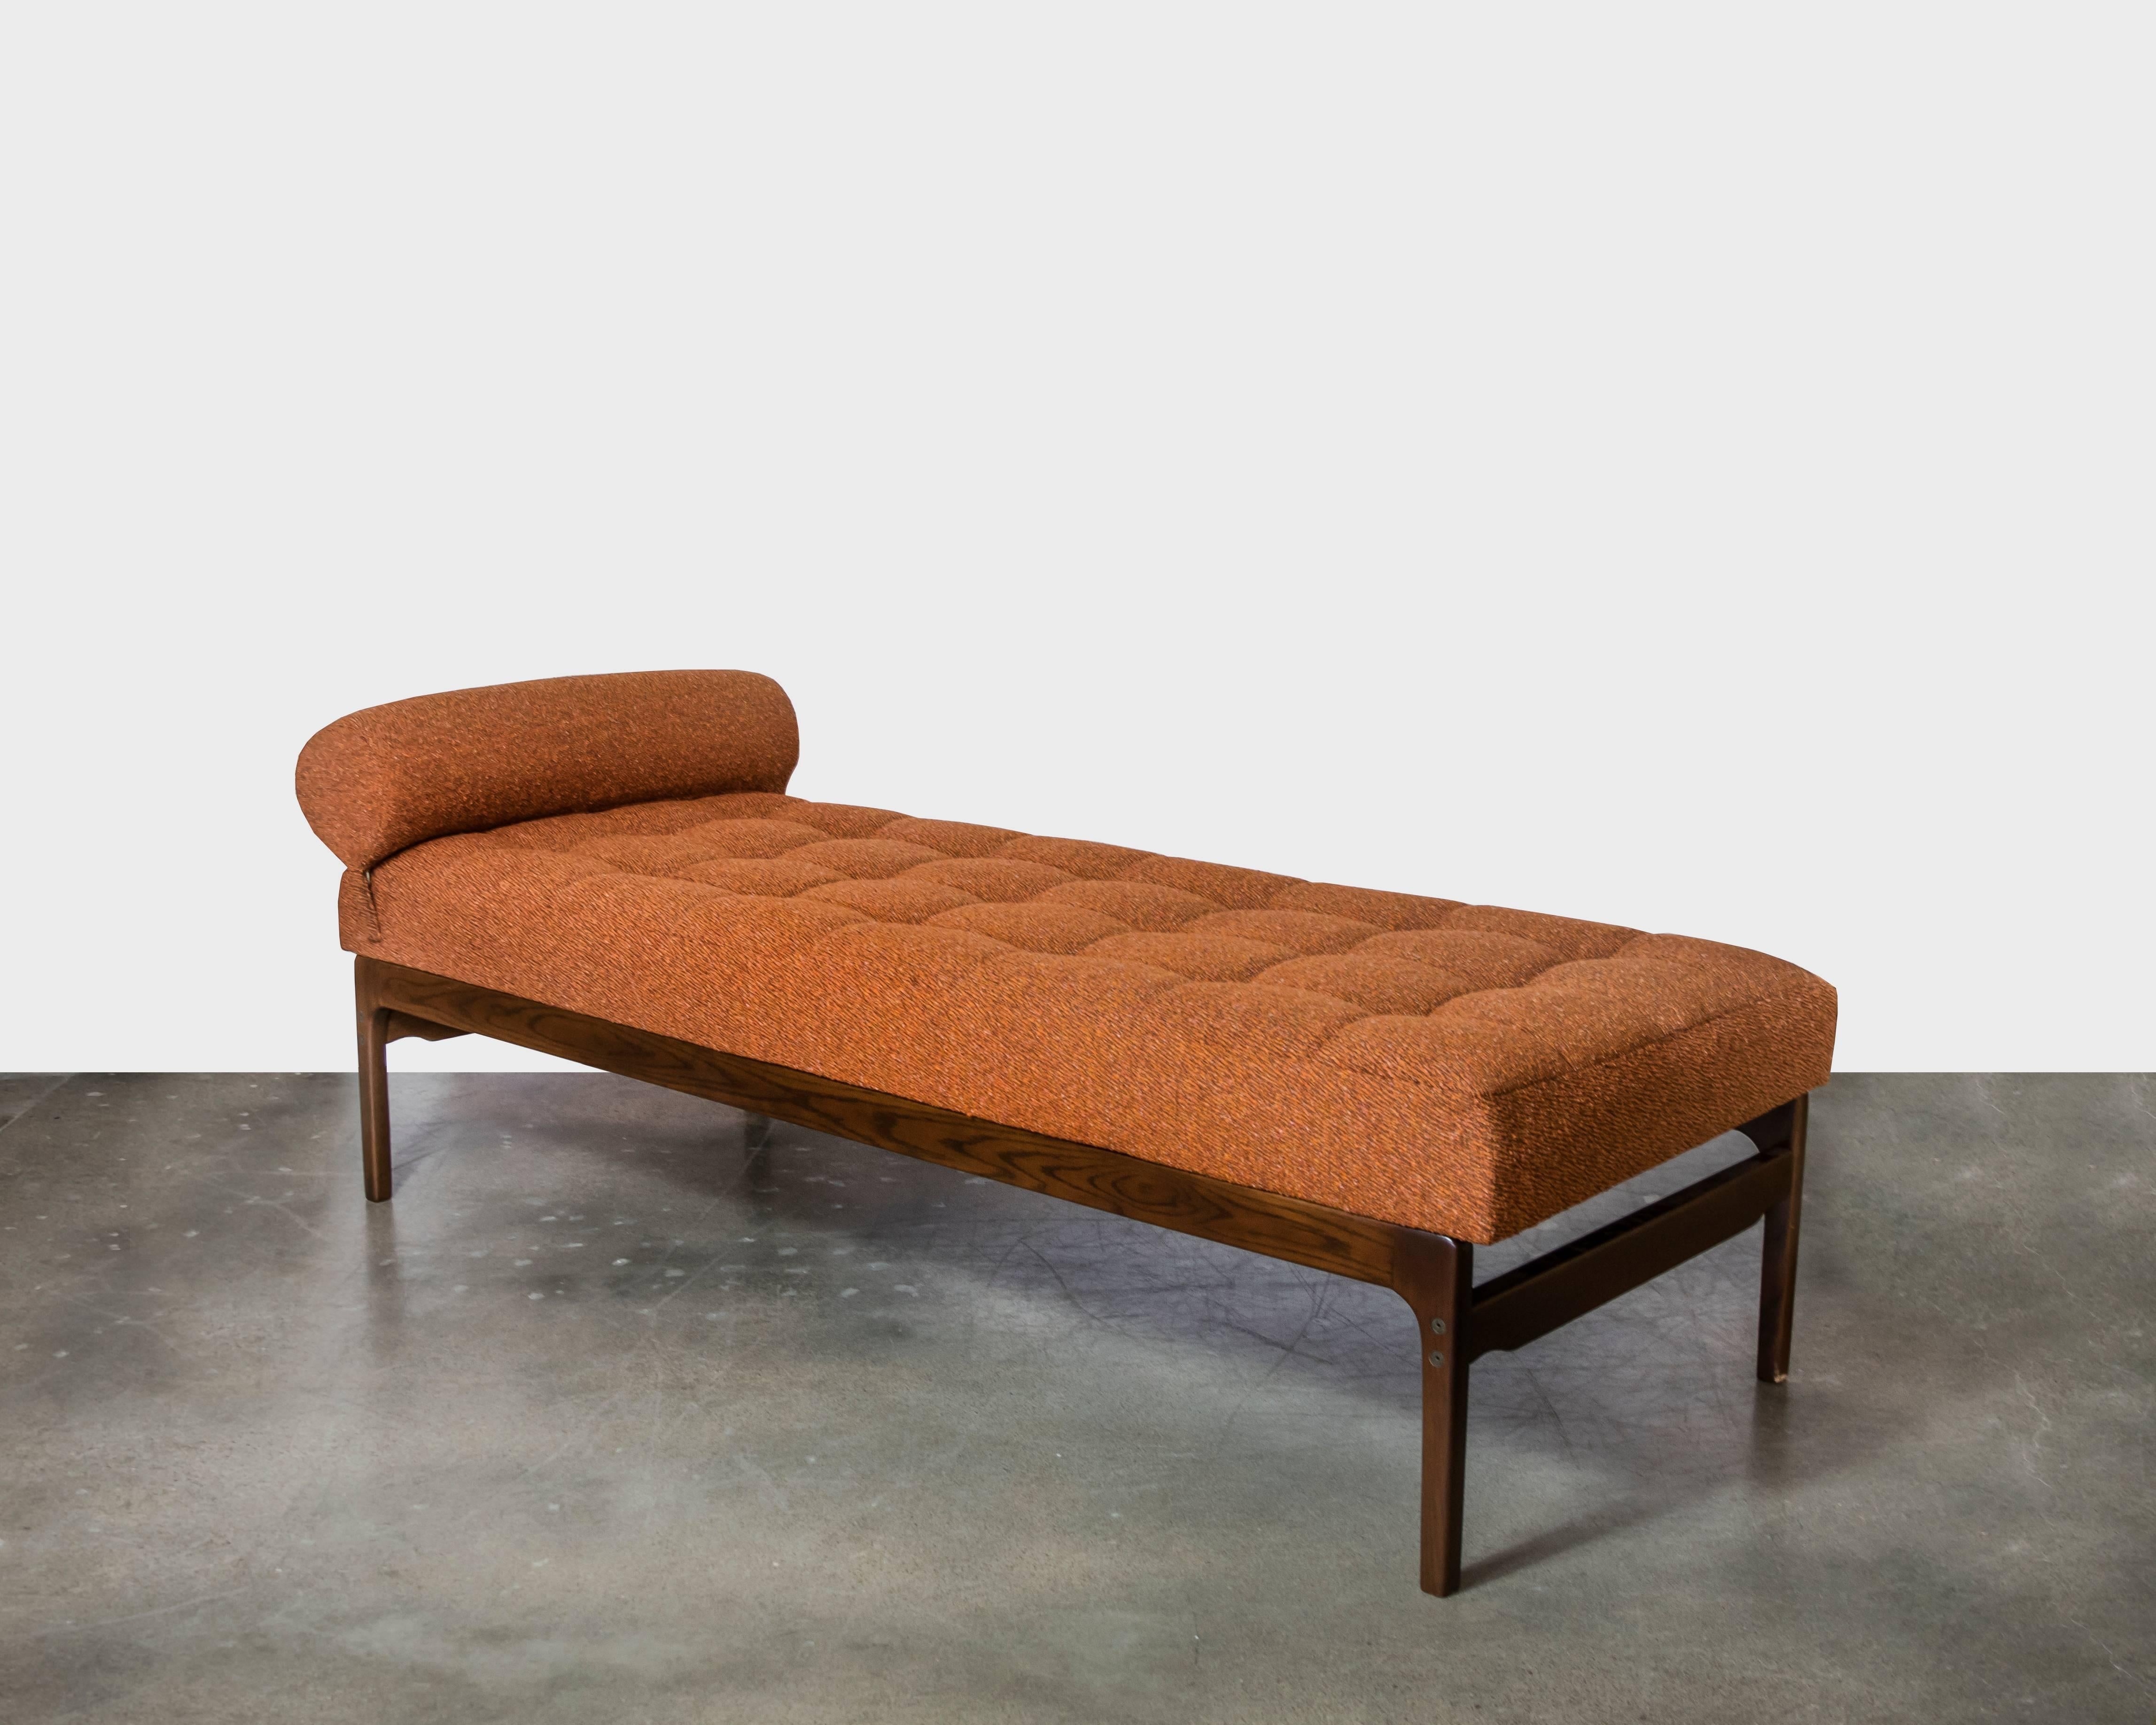 If you don't have the budget or space for the Barcelona sofa by Mies van der Rohe, this knockout bench or chaise longue is a wonderful substitute. Covered in newer orange and brown chenille with a walnut base in excellent vintage condition.